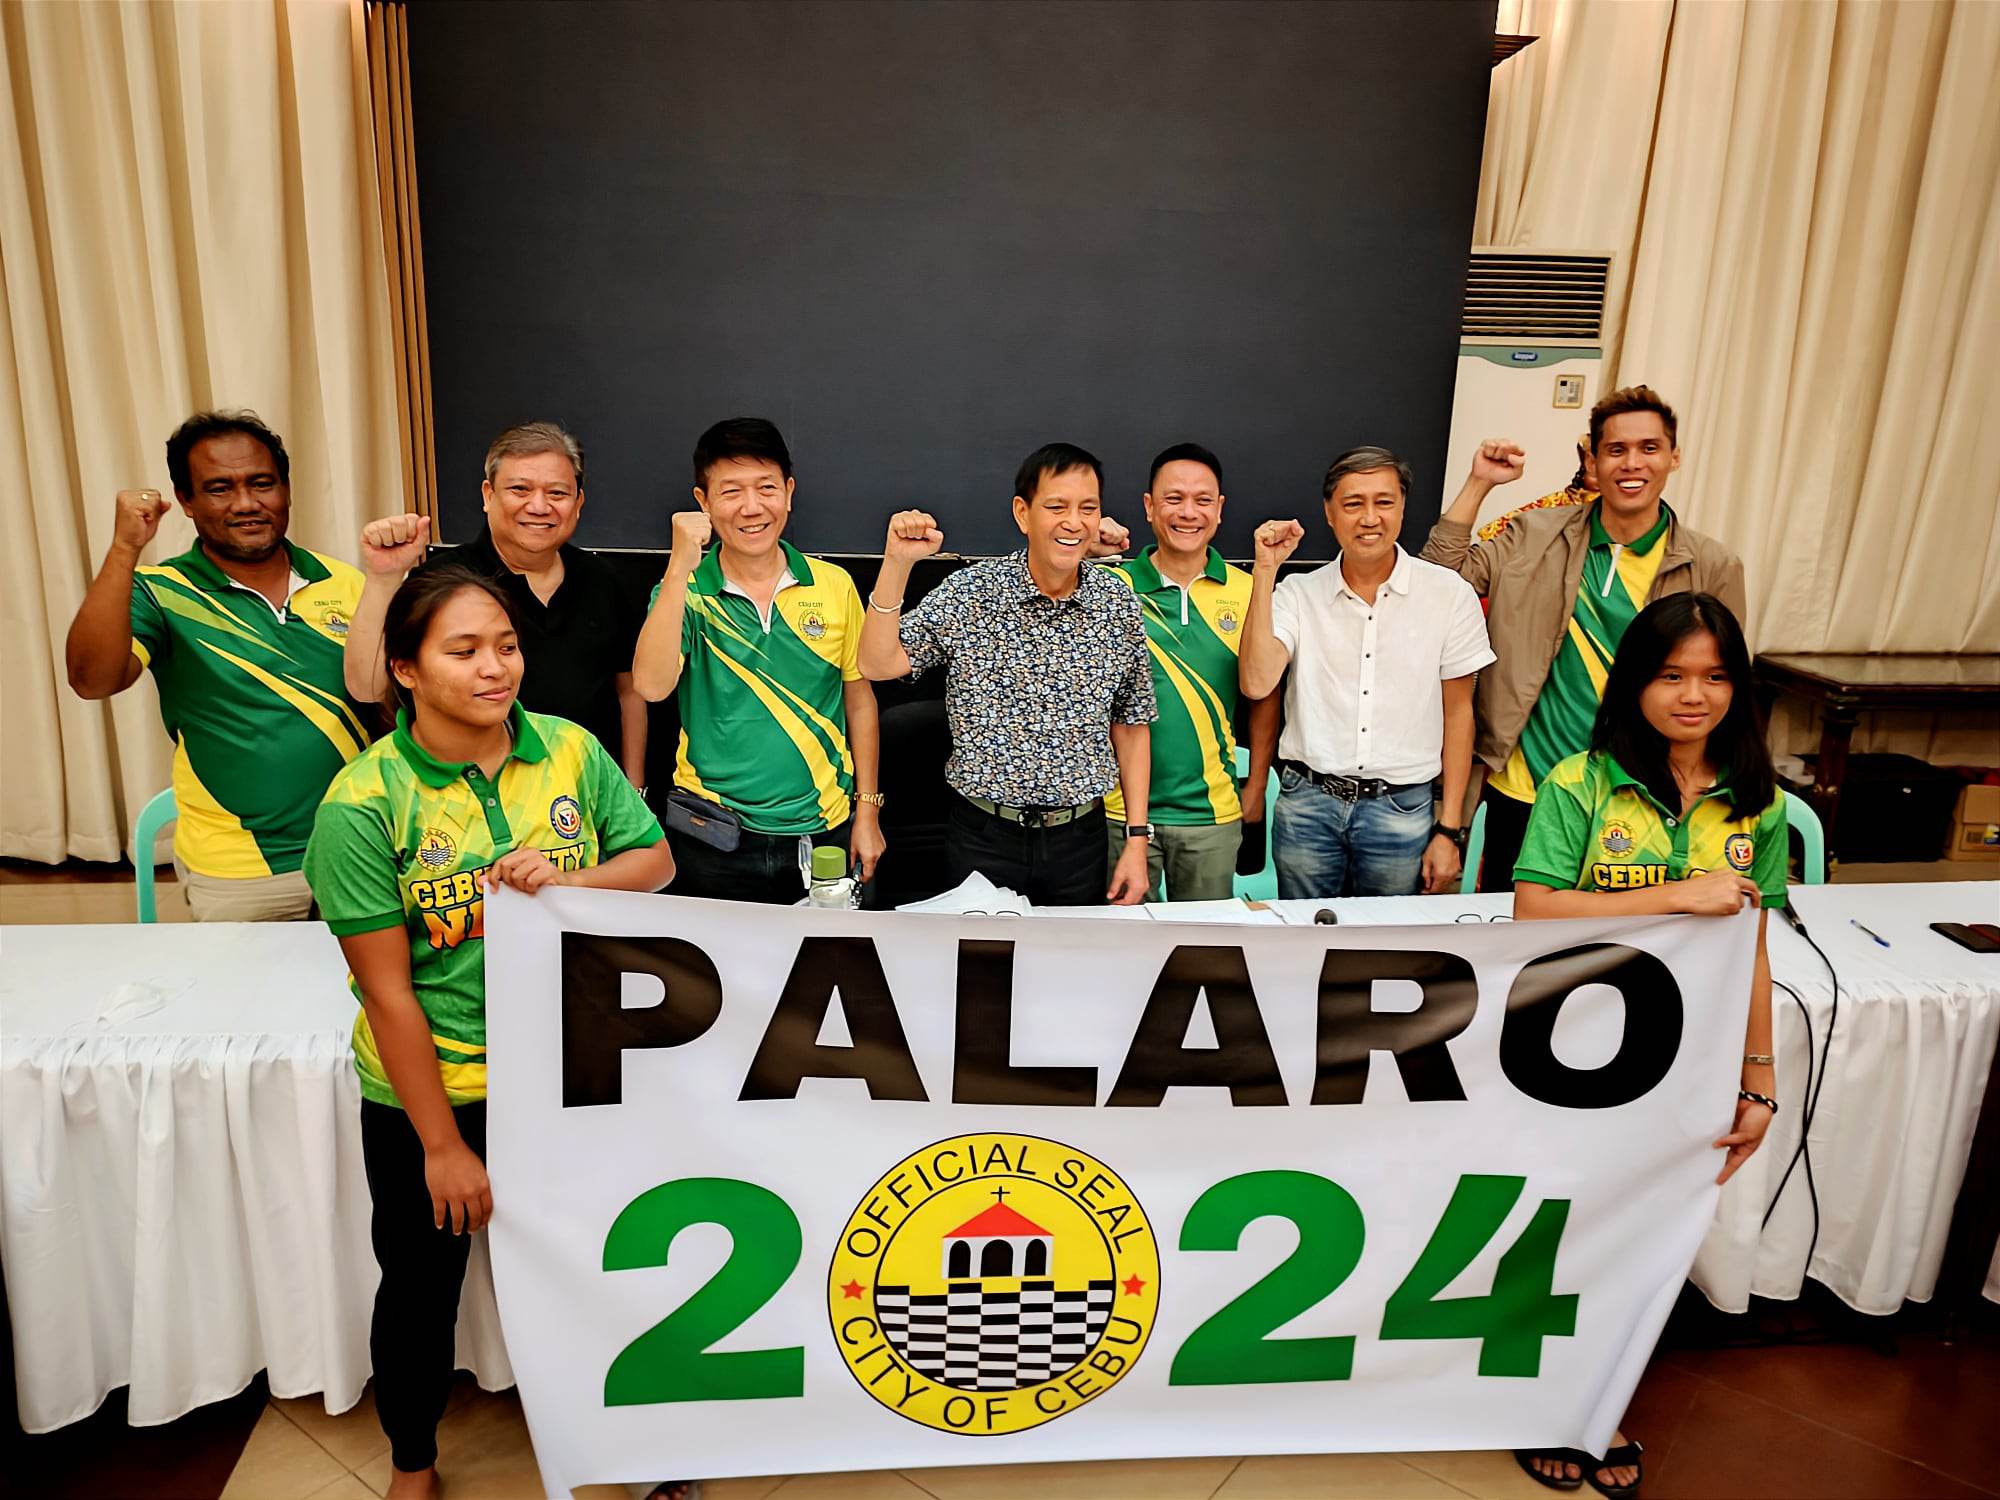 Palaro goal P65M allotted for CCSC as Cebu City aims for hosting 2024